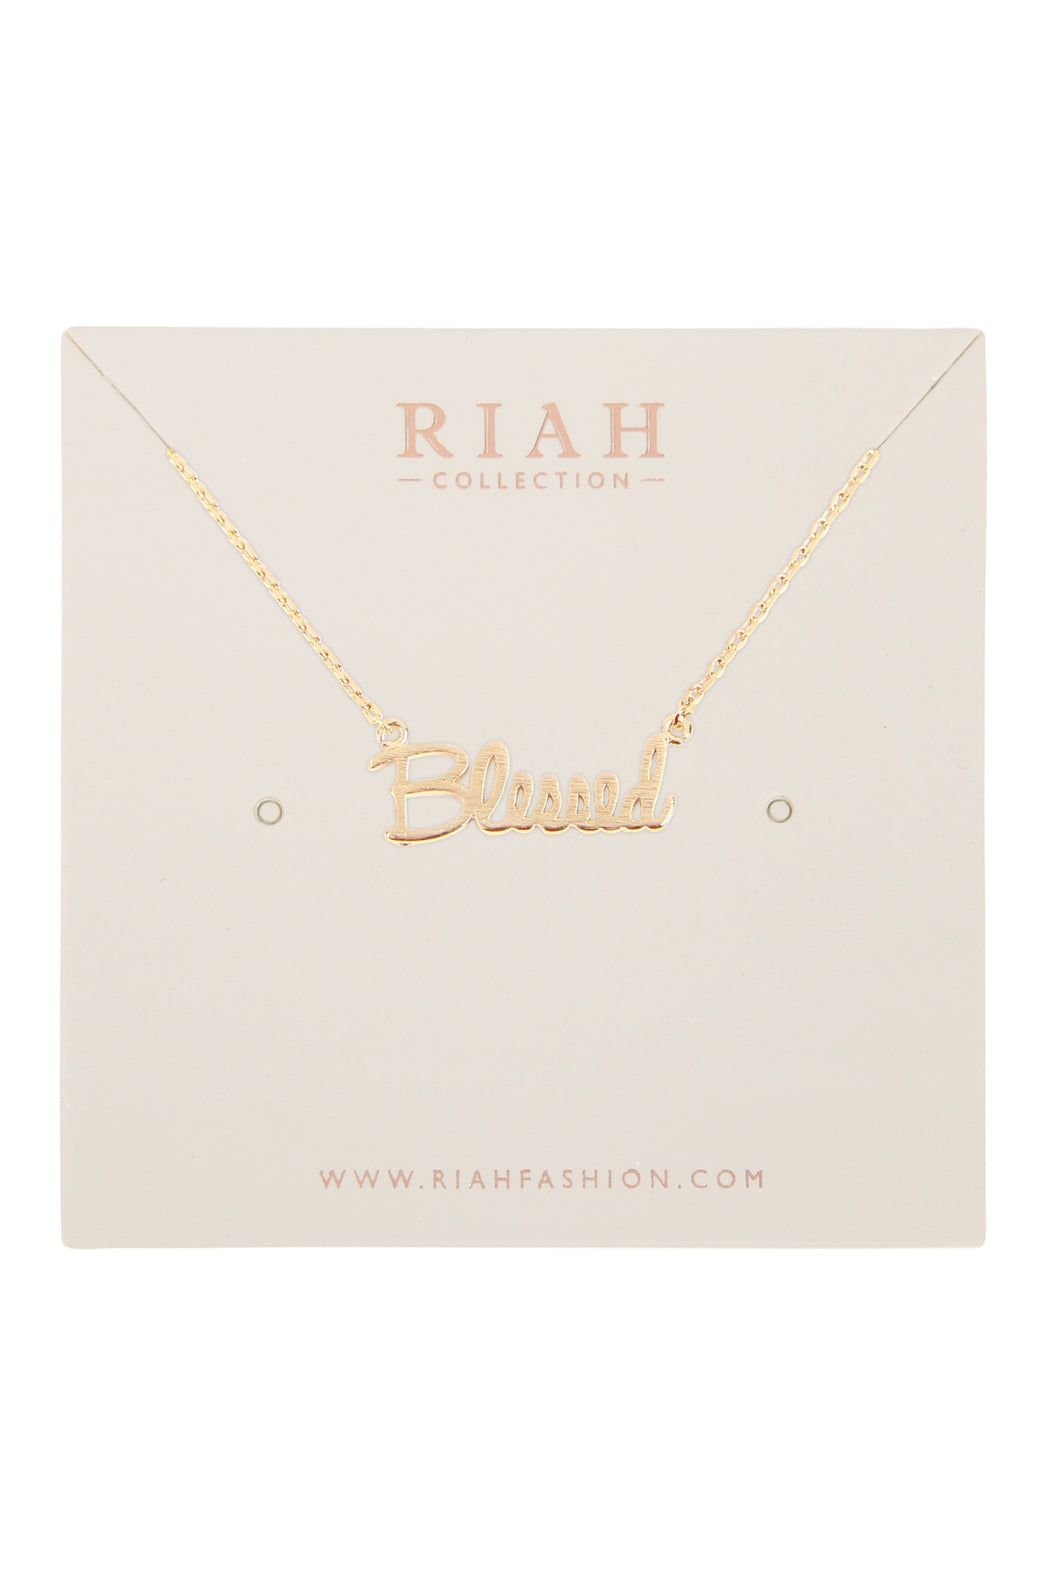 BLESSED PENDANT NECKLACE (NOW $1.75 ONLY!)